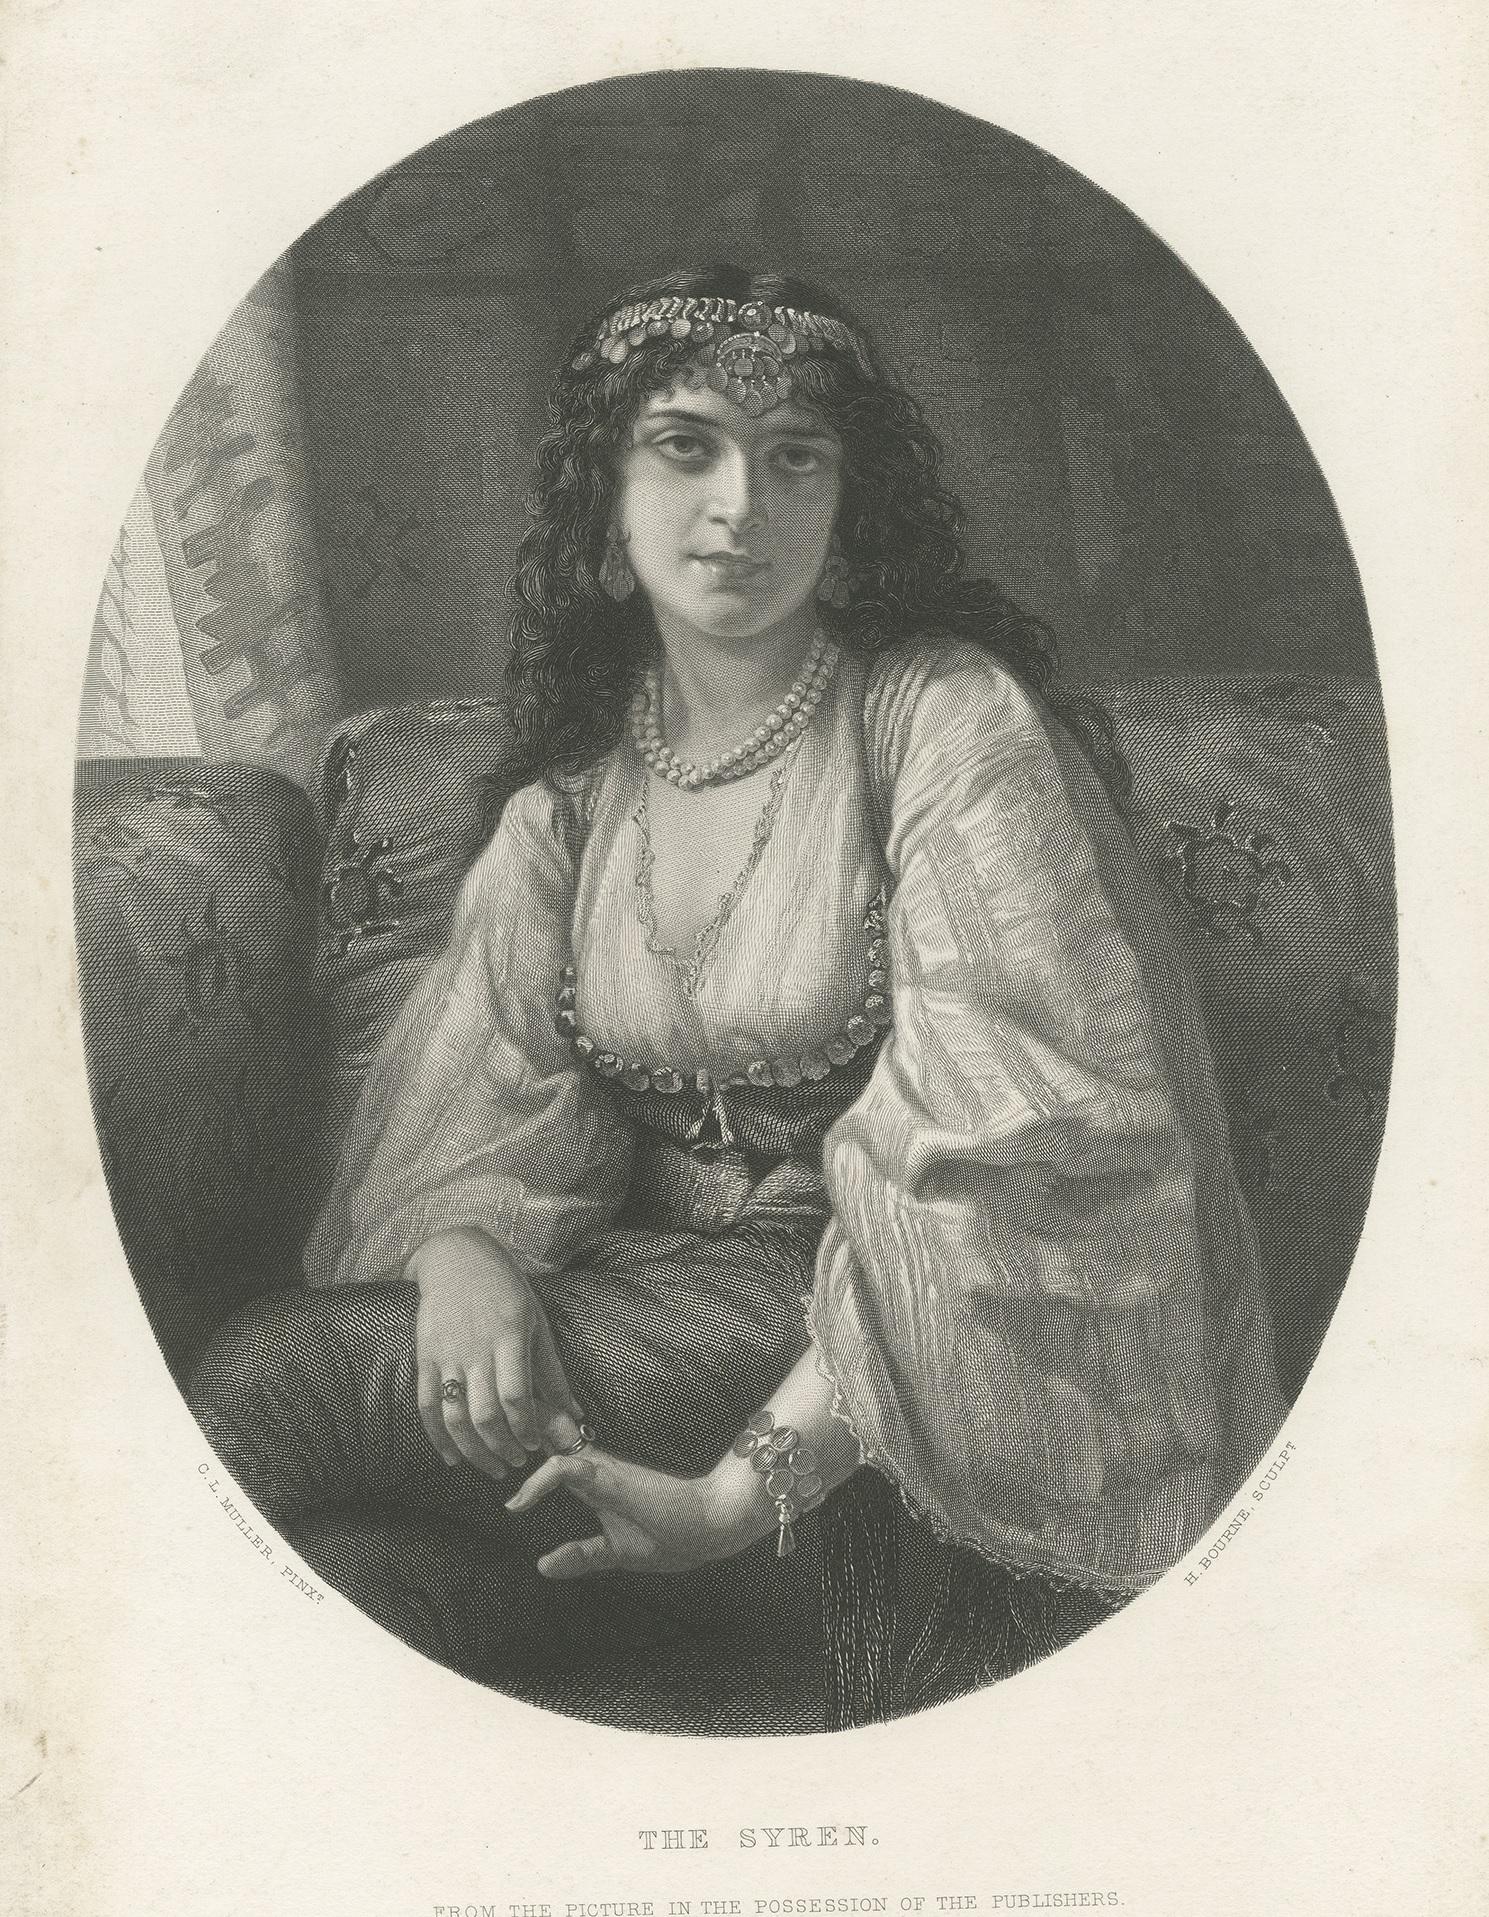 Antique print titled 'The Syren'. Portrait engraved by H. Bourne after a painting by C.L. Muller. Published by Virtue & Co., London.